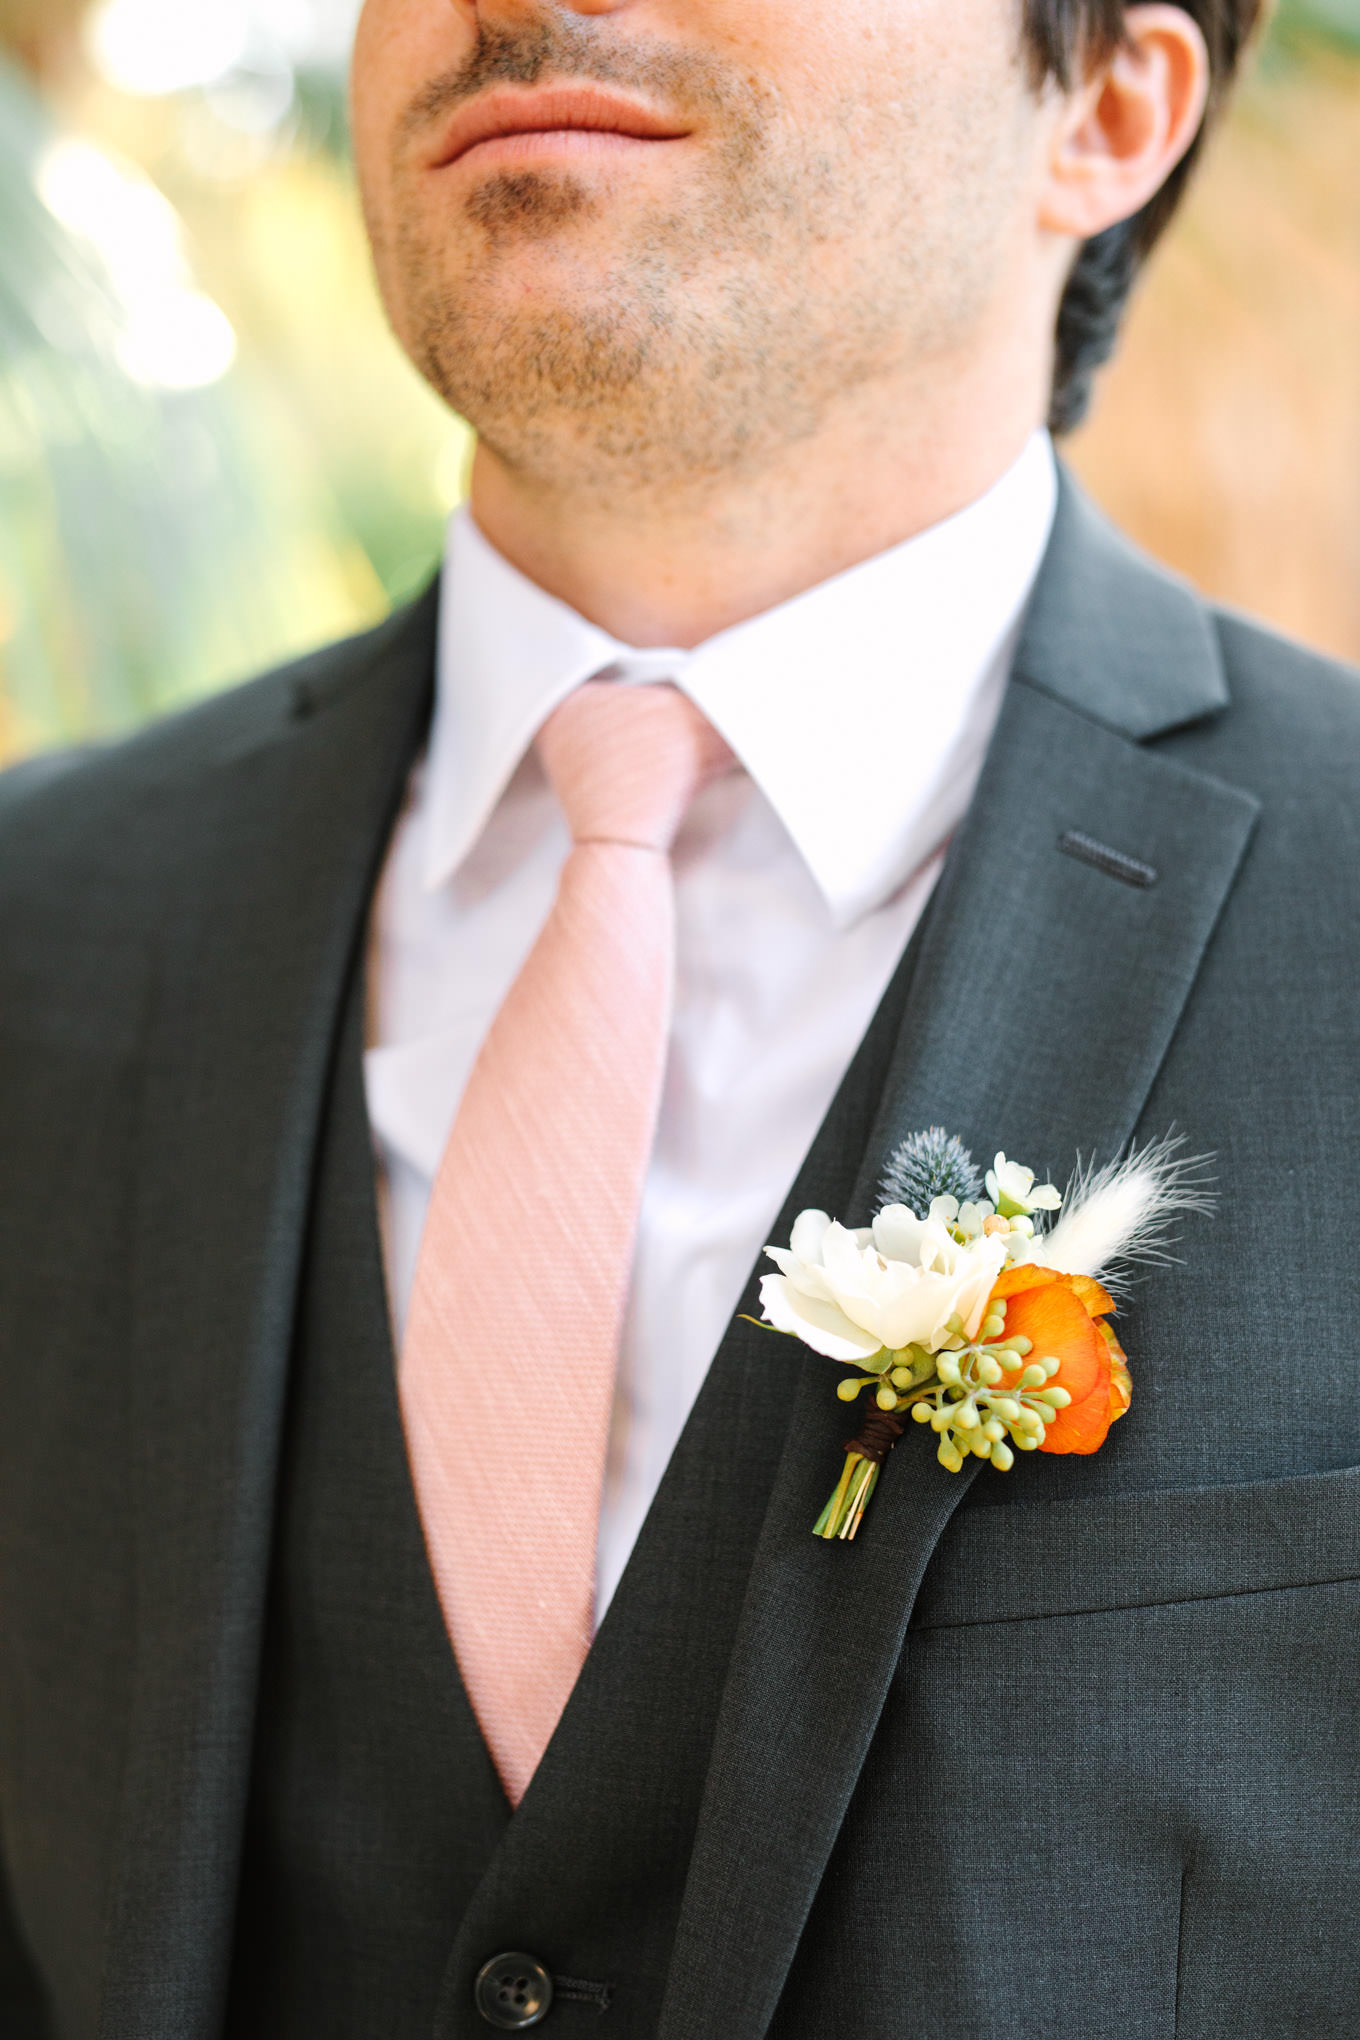 Boutonniere detail | Living Desert Zoo & Gardens wedding with unique details | Elevated and colorful wedding photography for fun-loving couples in Southern California |  #PalmSprings #palmspringsphotographer #gardenwedding #palmspringswedding  Source: Mary Costa Photography | Los Angeles wedding photographer 